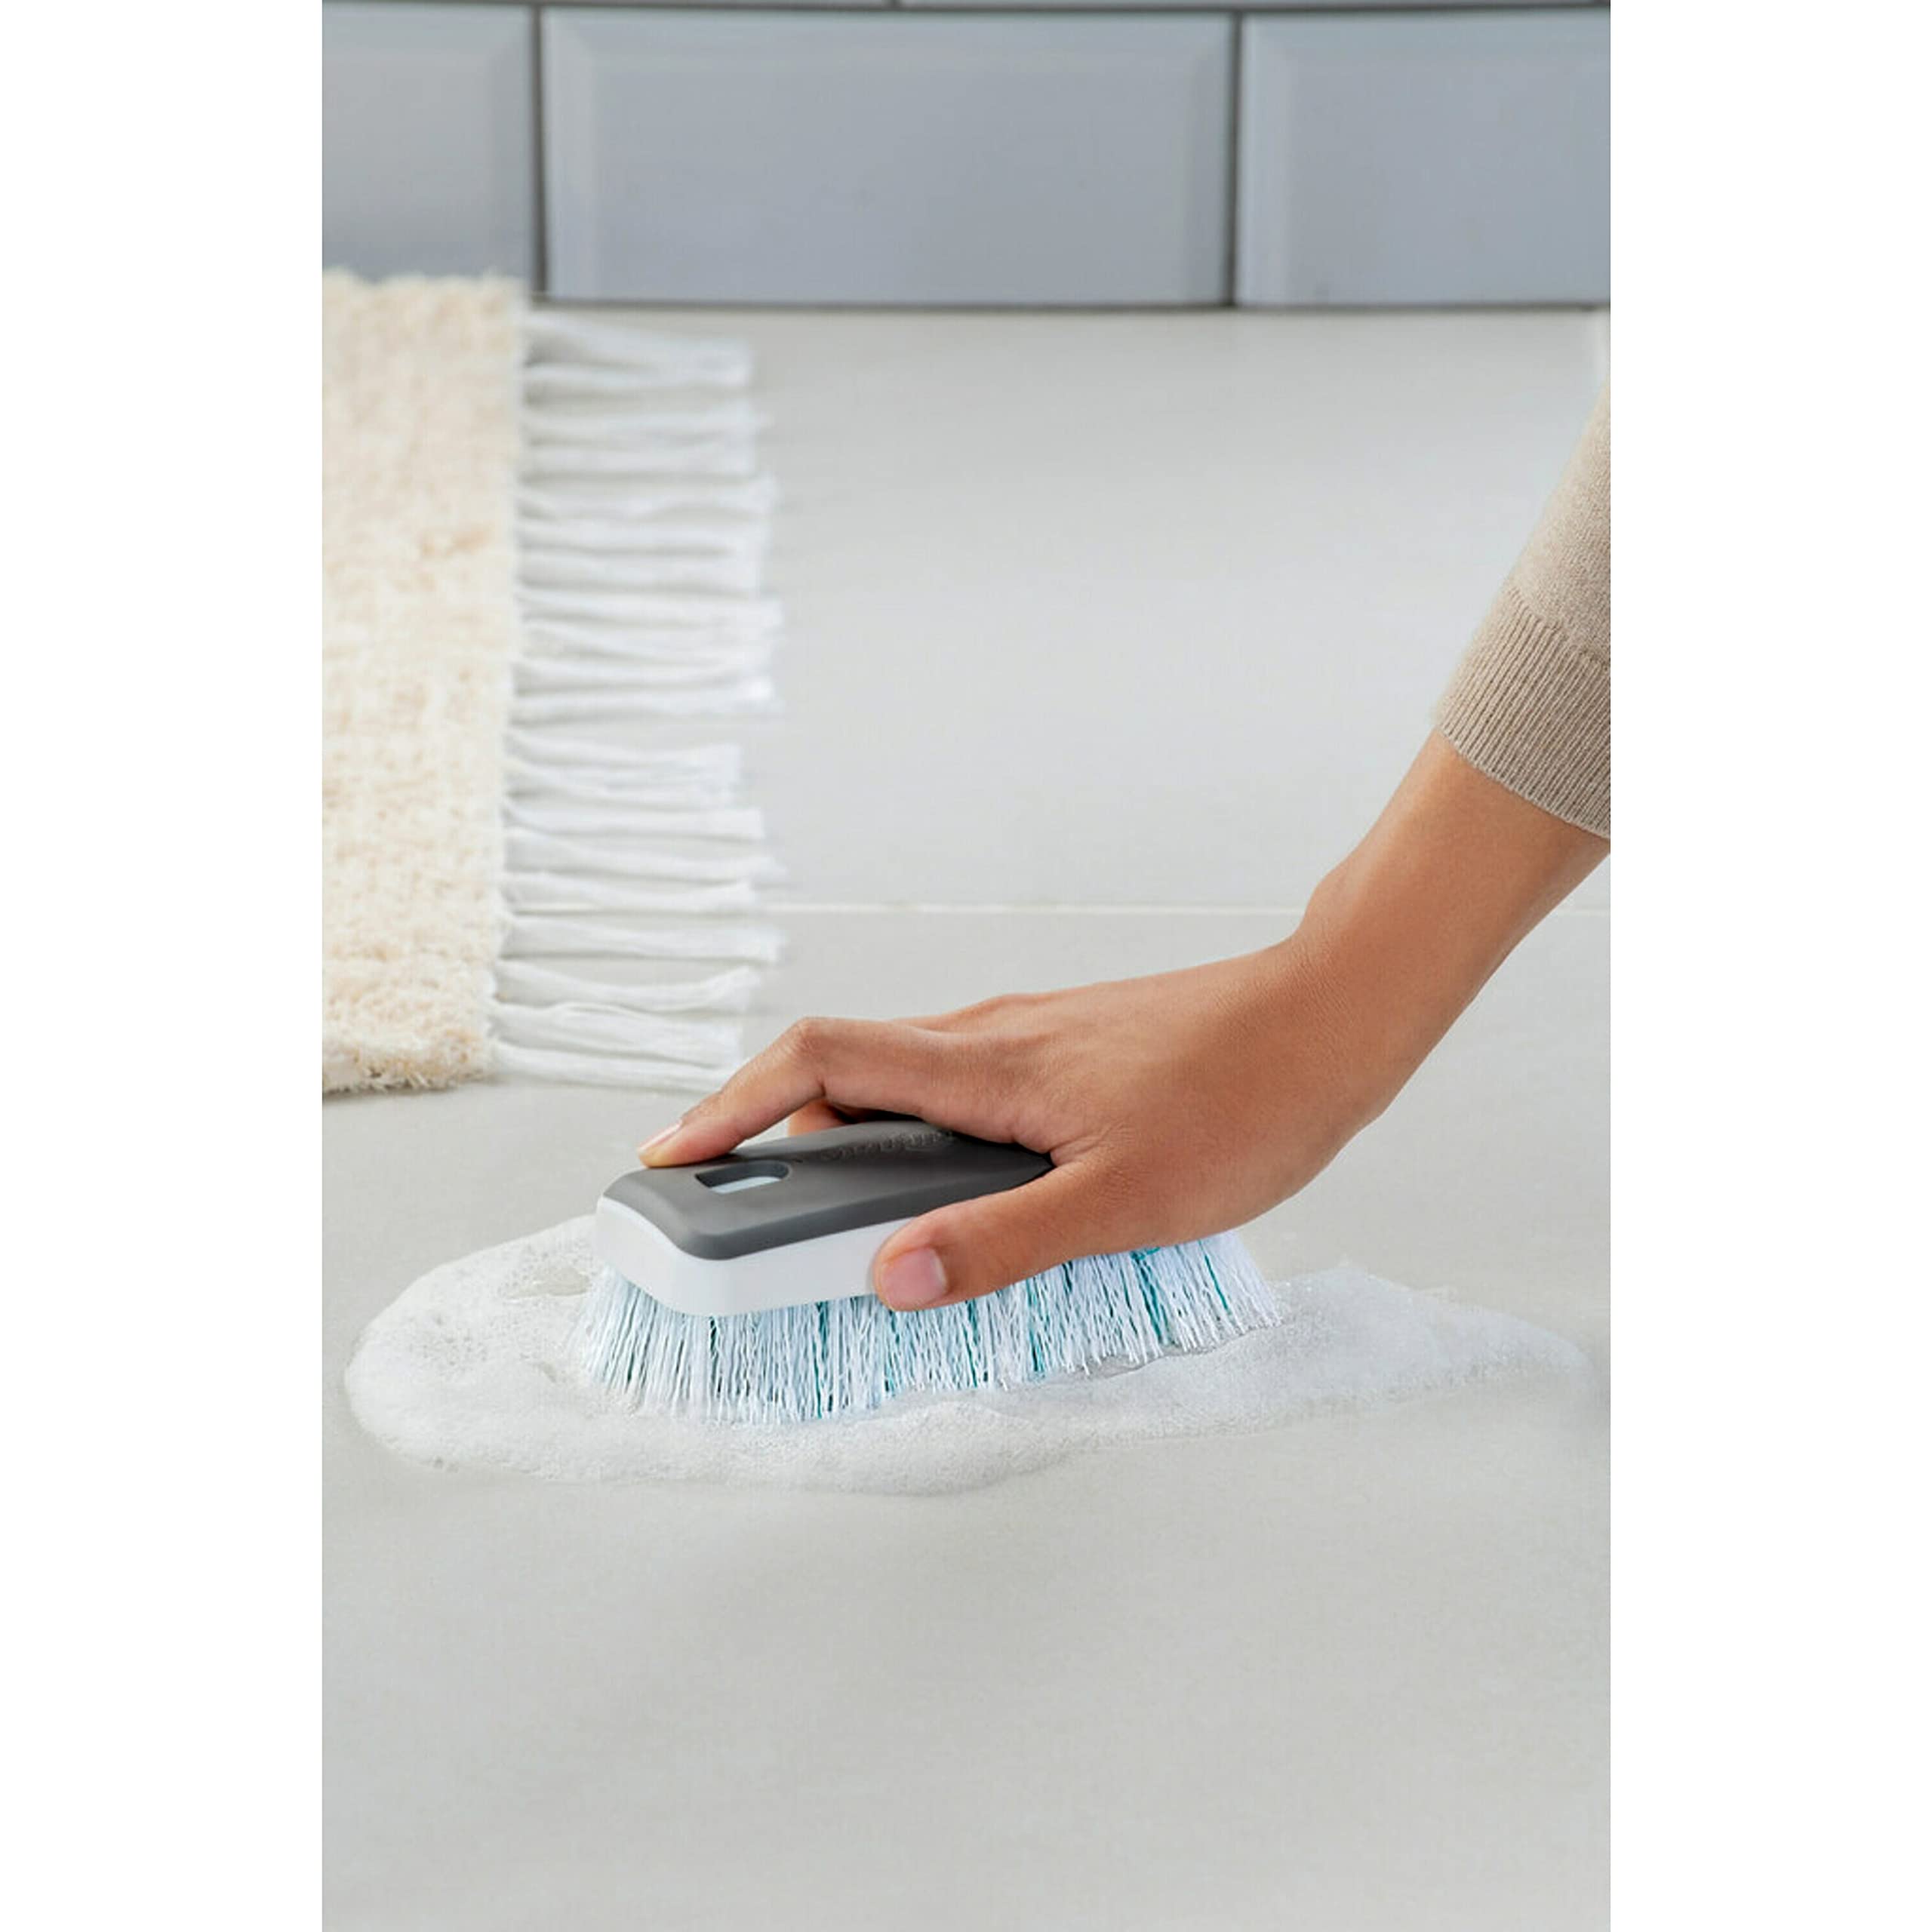 Scotch-Brite Deep Clean Brush, For Tile Floors and Walls, Shower Doors, Tubs, and More